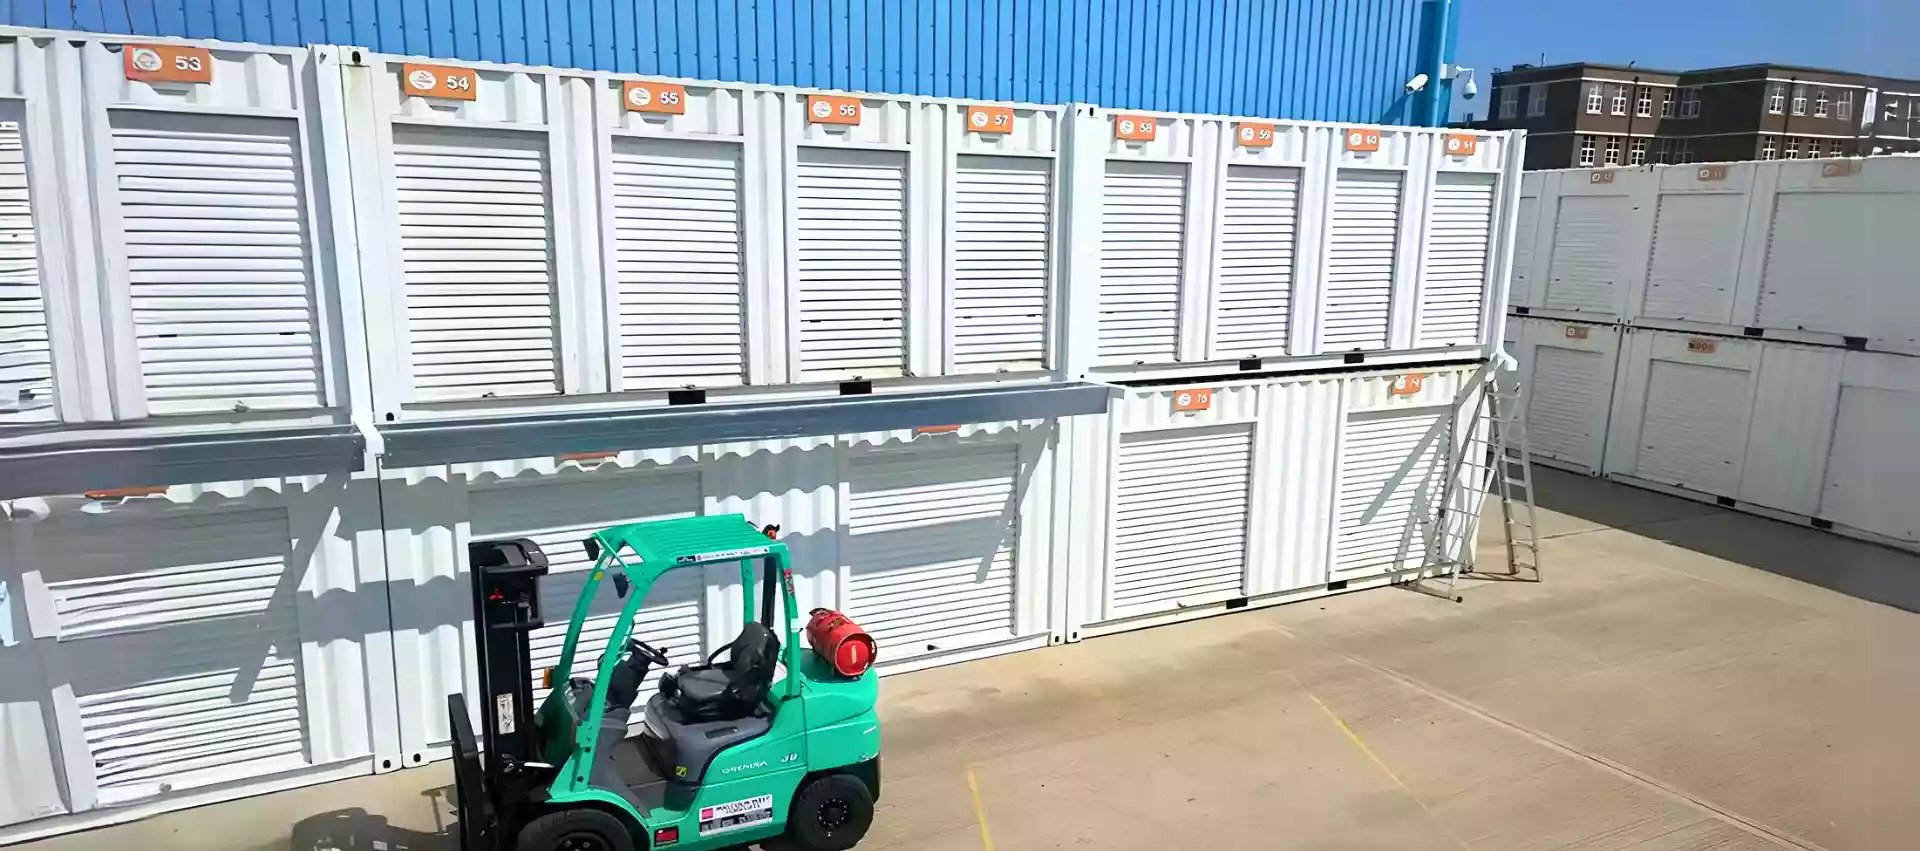 self storage container site, build with 20ft shipping container,each self storage unit equipment with 4 roller up doors. 